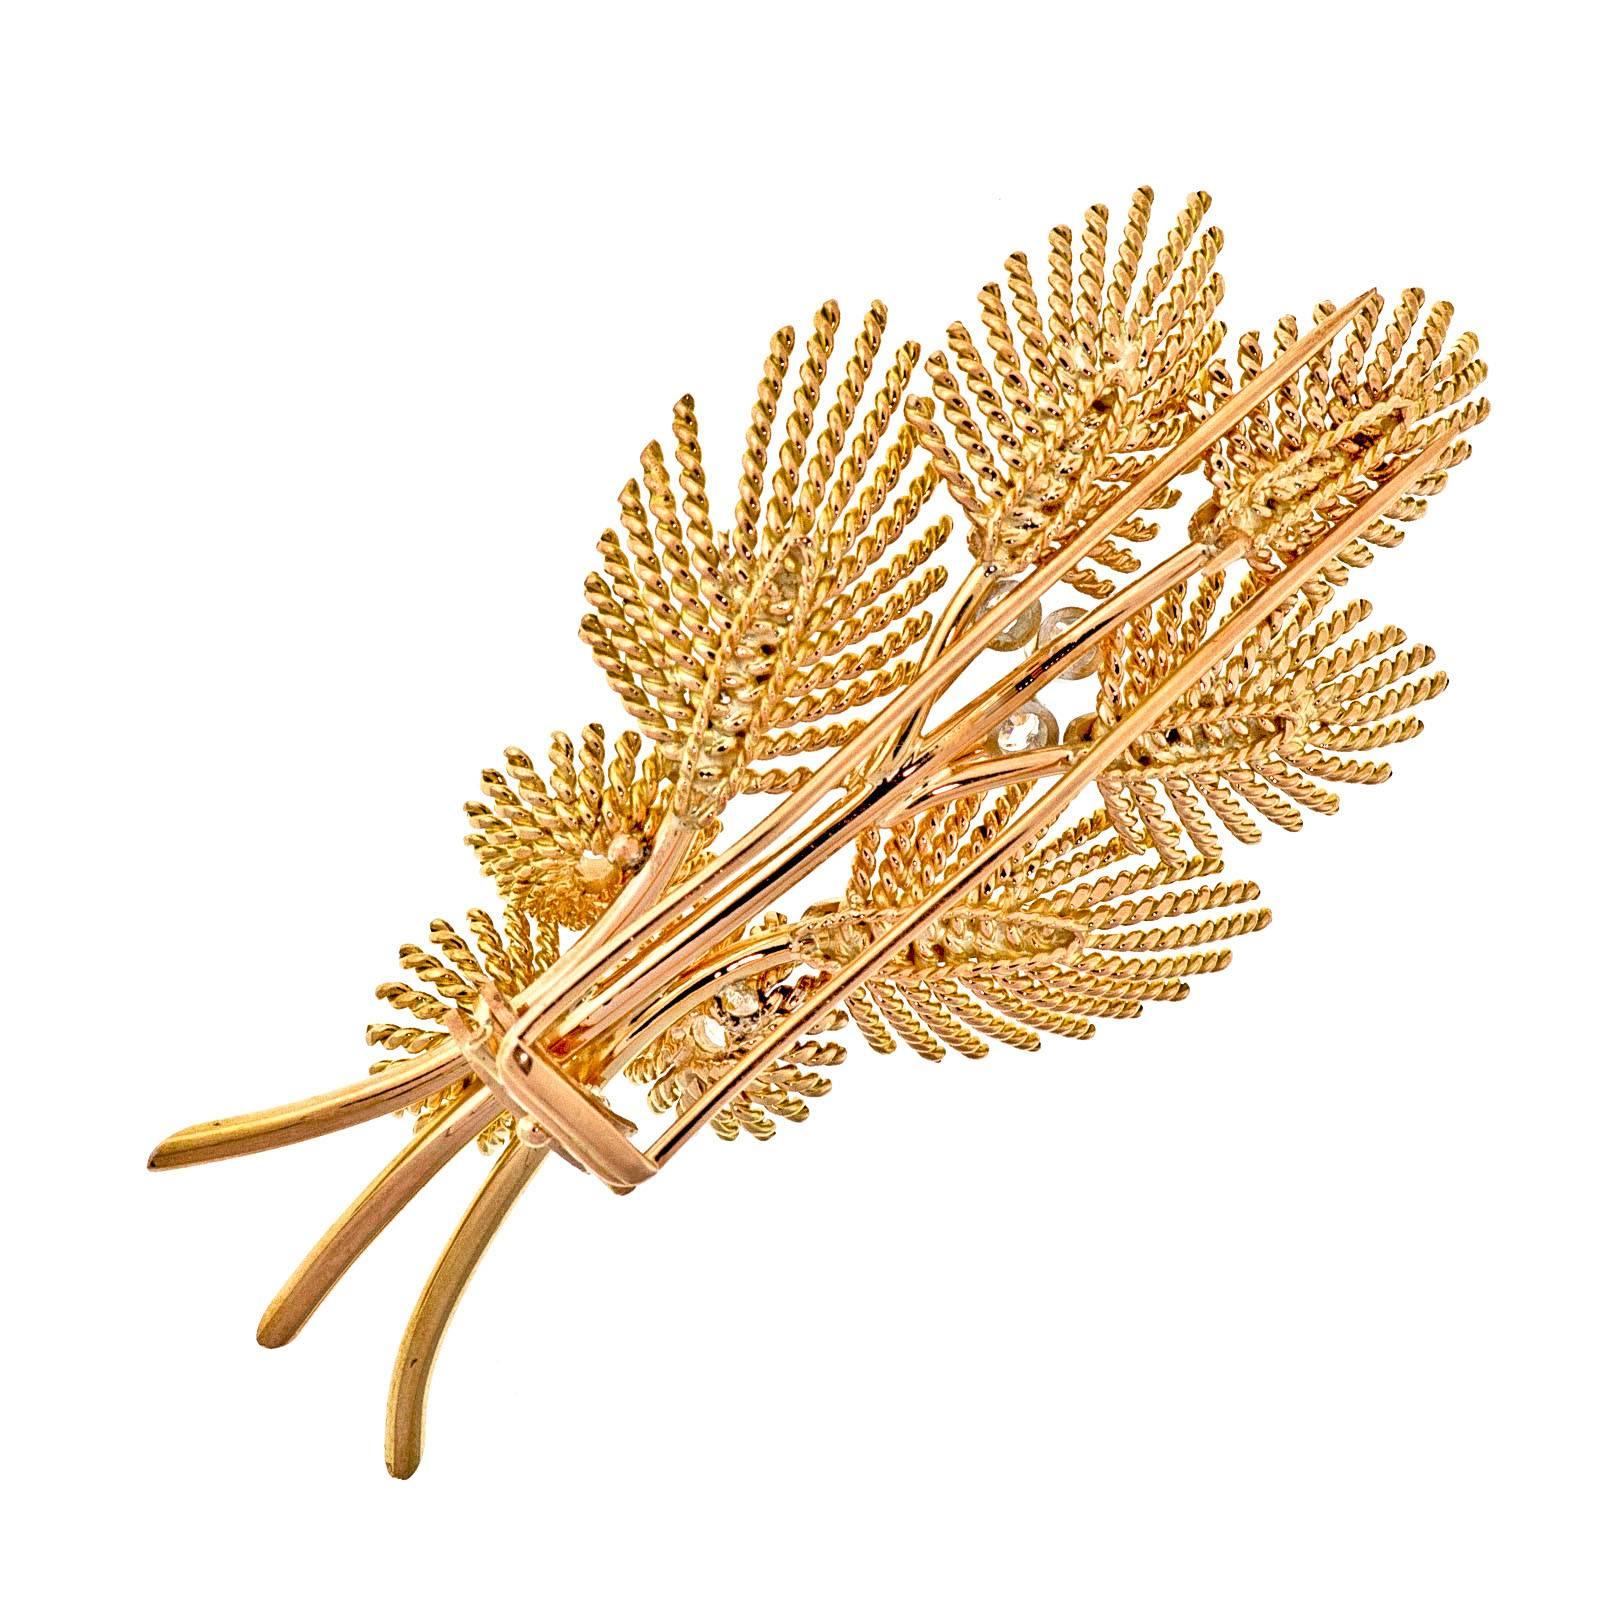 Mid-Century 1950's Leaf and diamond brooch. Handmade 18k yellow gold and platinum handmade flower brooch with diamonds along the leaf's in platinum inlays. Rose gold double clip back.

6 round full cut diamonds, approx. total weight .48cts, G – H,